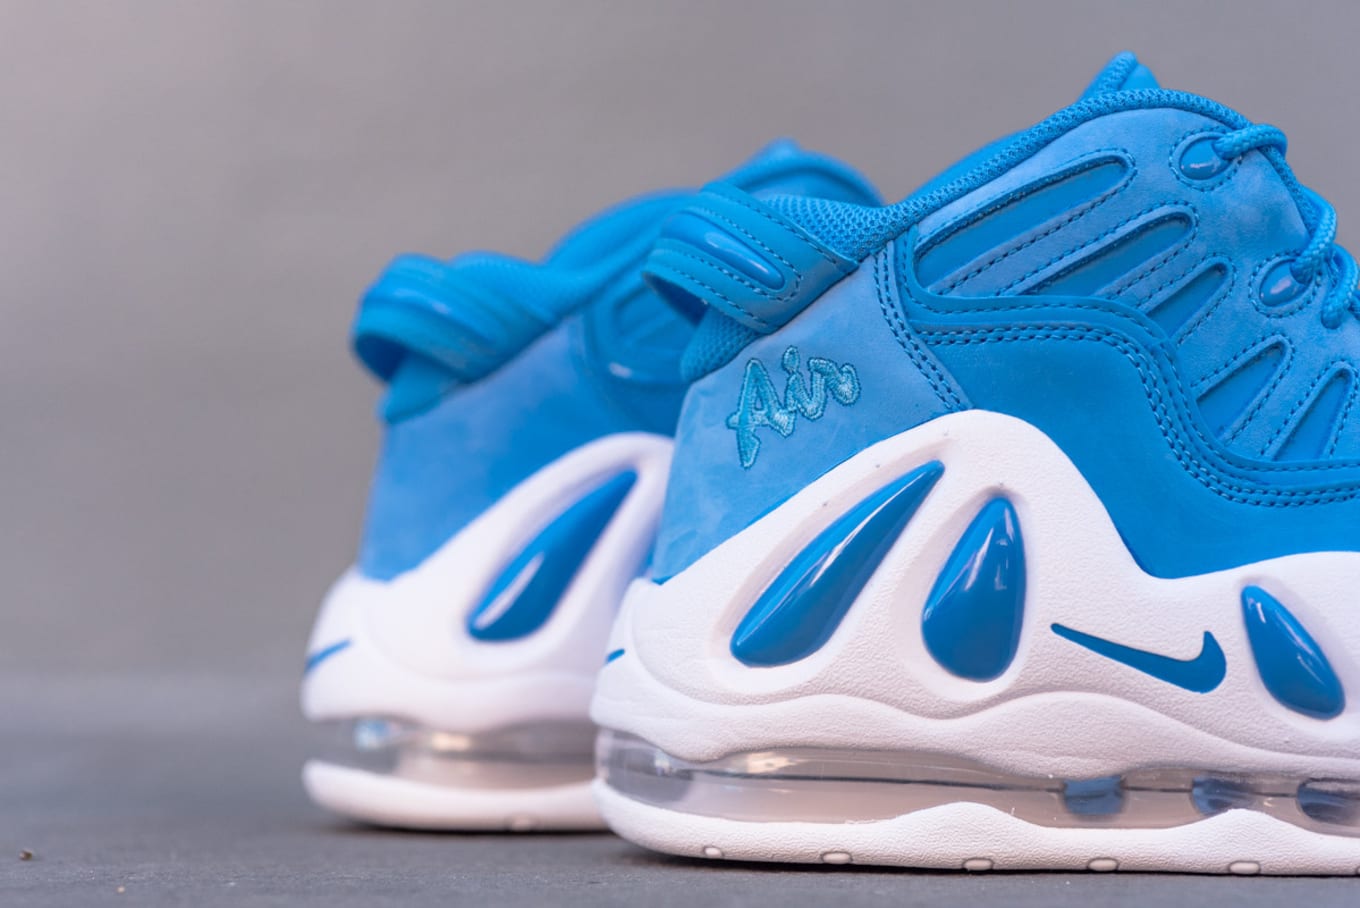 Nike Air Max Uptempo 97 Air Max2 Uptempo 94 AS University Blue Release Date Collector